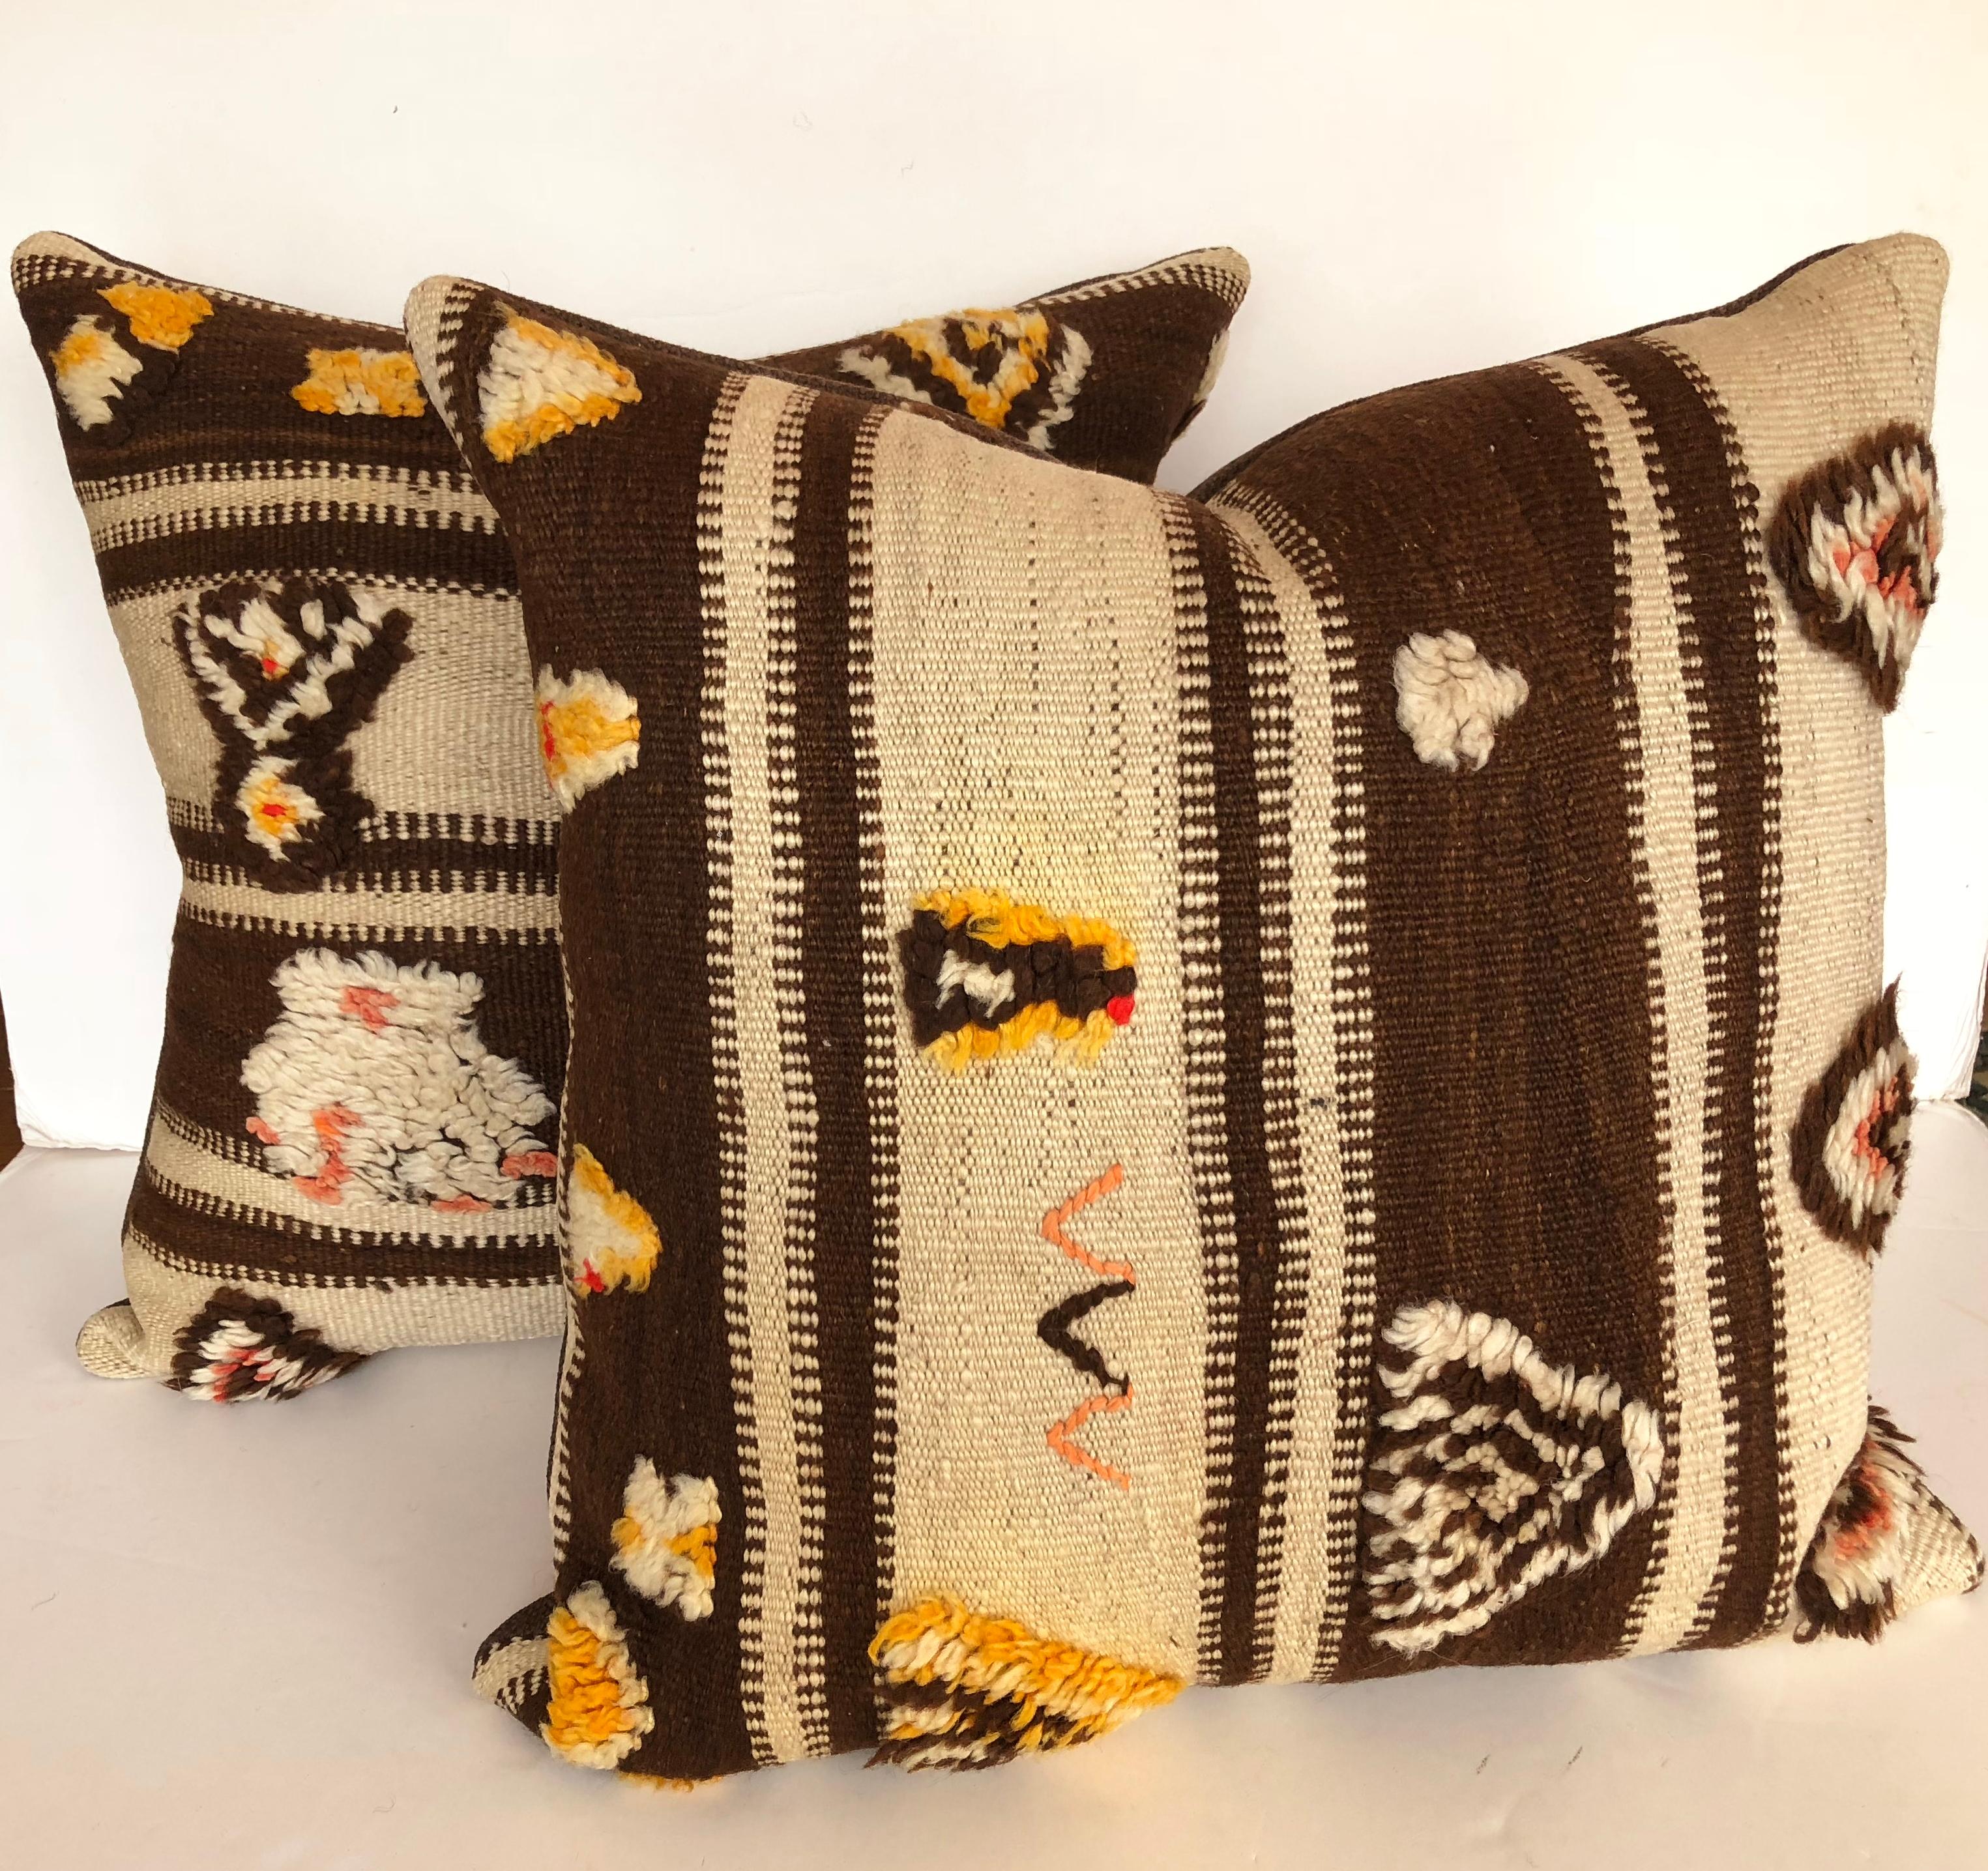 20th Century Custom Pillow by Maison Suzanne, Cut from a Vintage Wool Moroccan Berber Rug